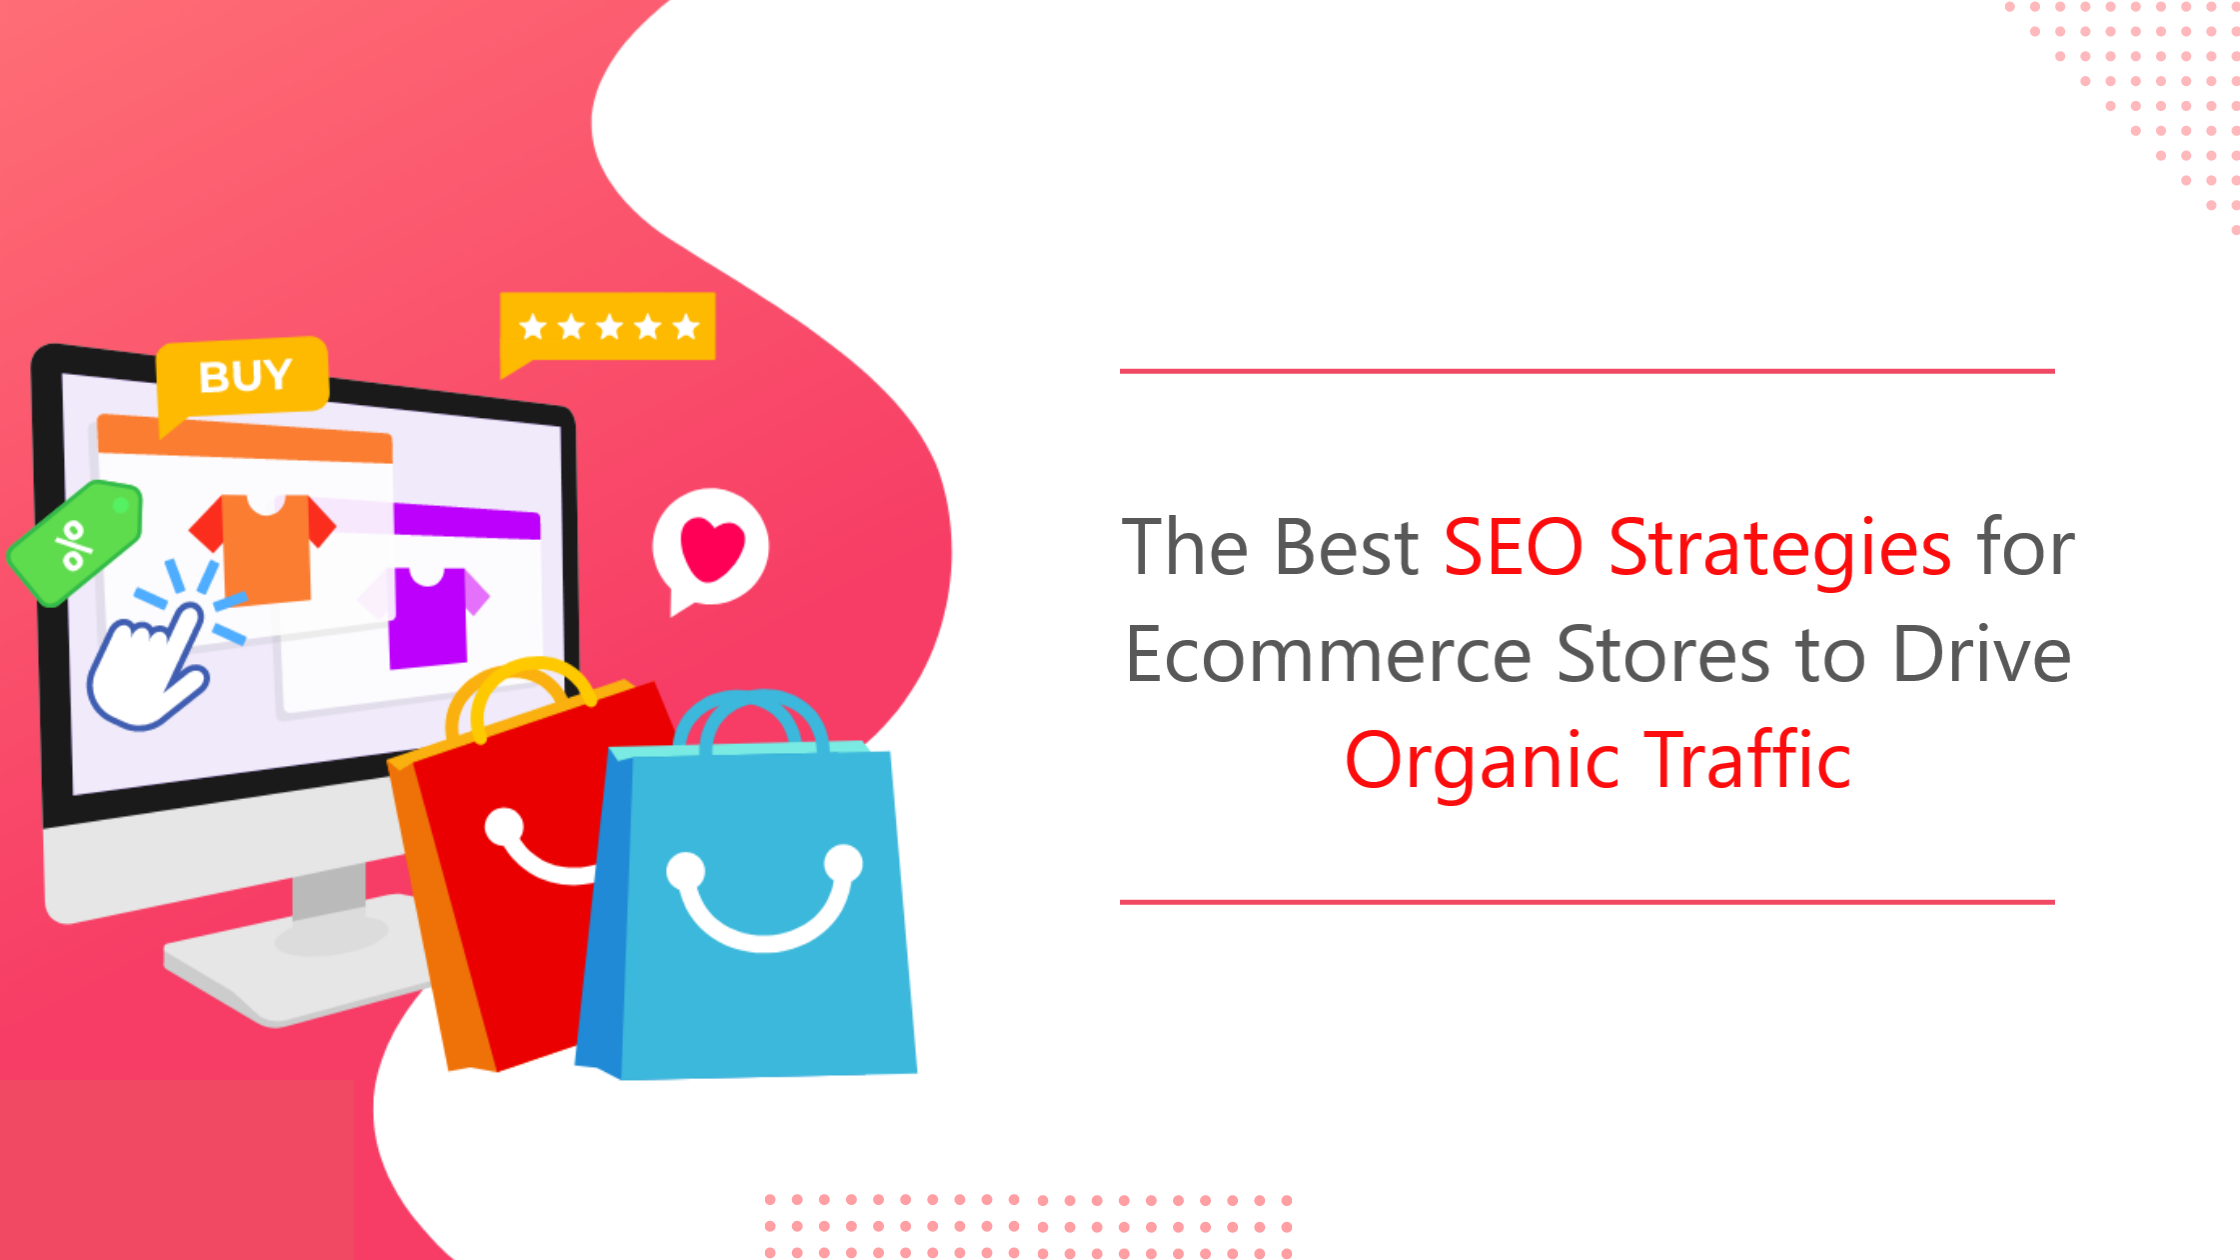 The Best SEO Strategies for Ecommerce Stores to Drive Organic Traffic